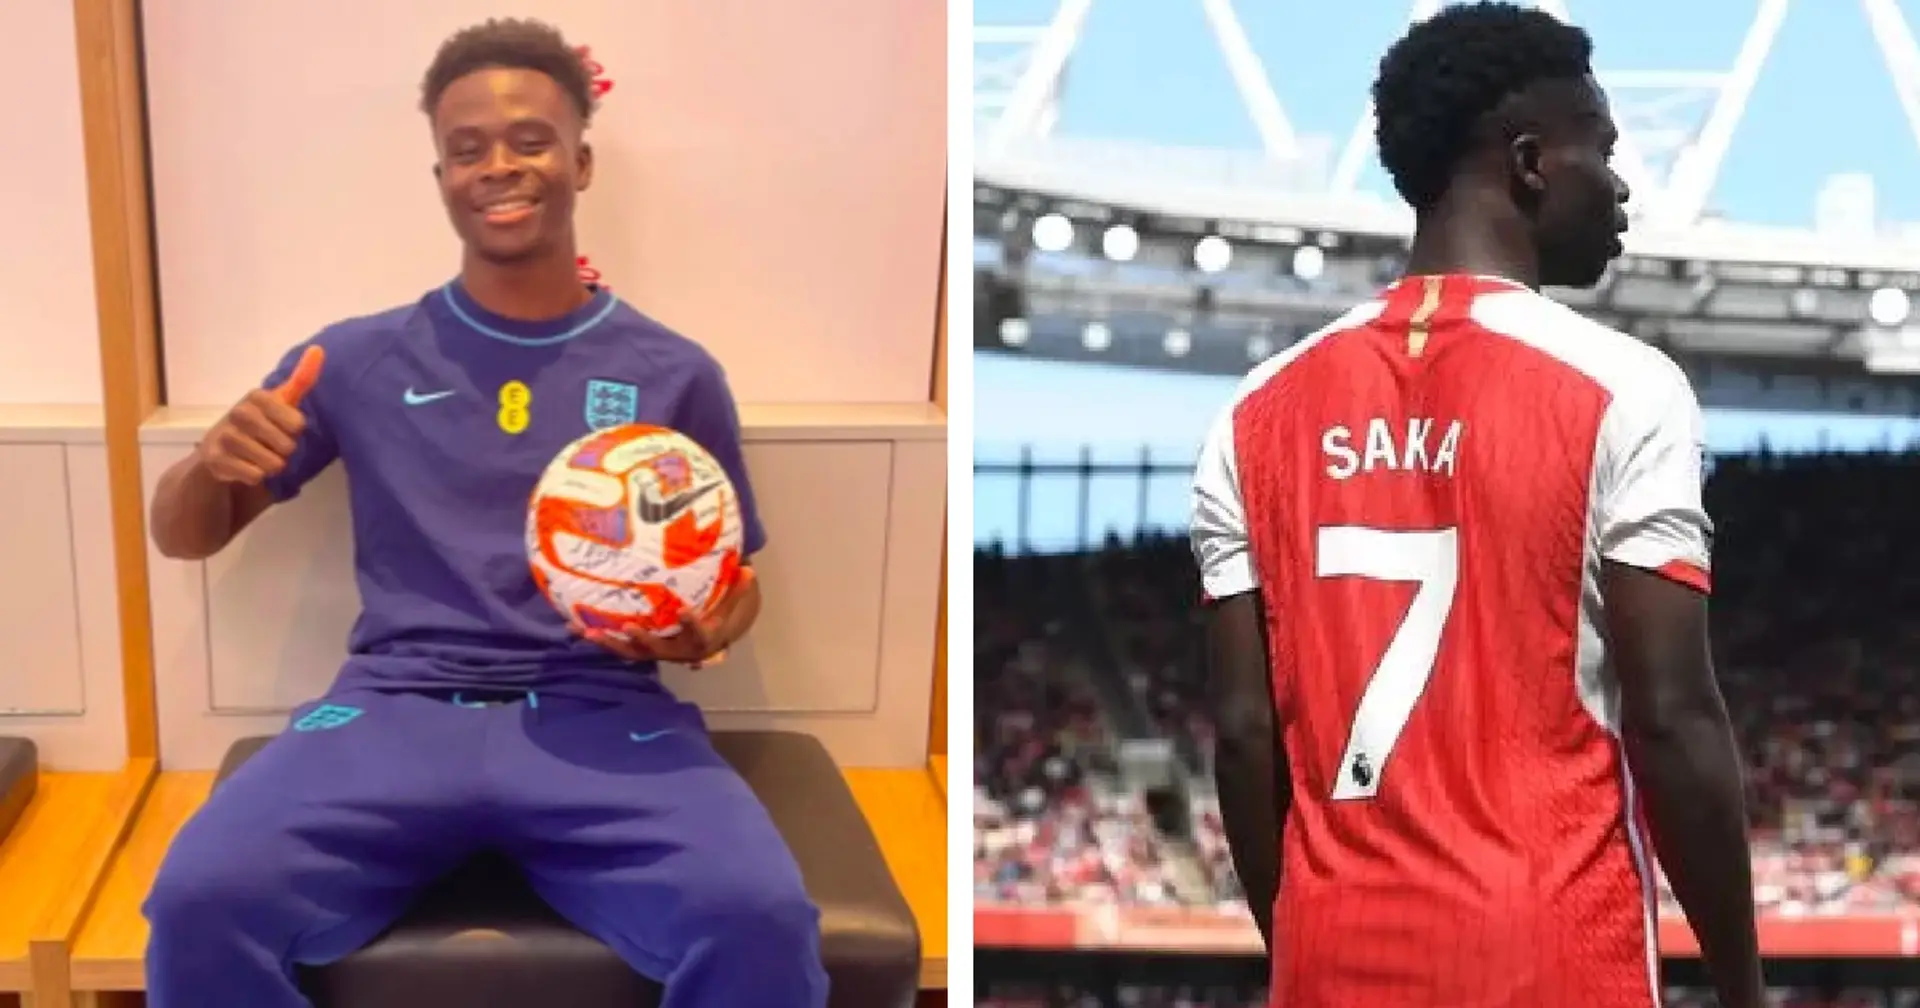 'I've got my head down': Saka makes '100 percent' promise that should excite Arsenal fans